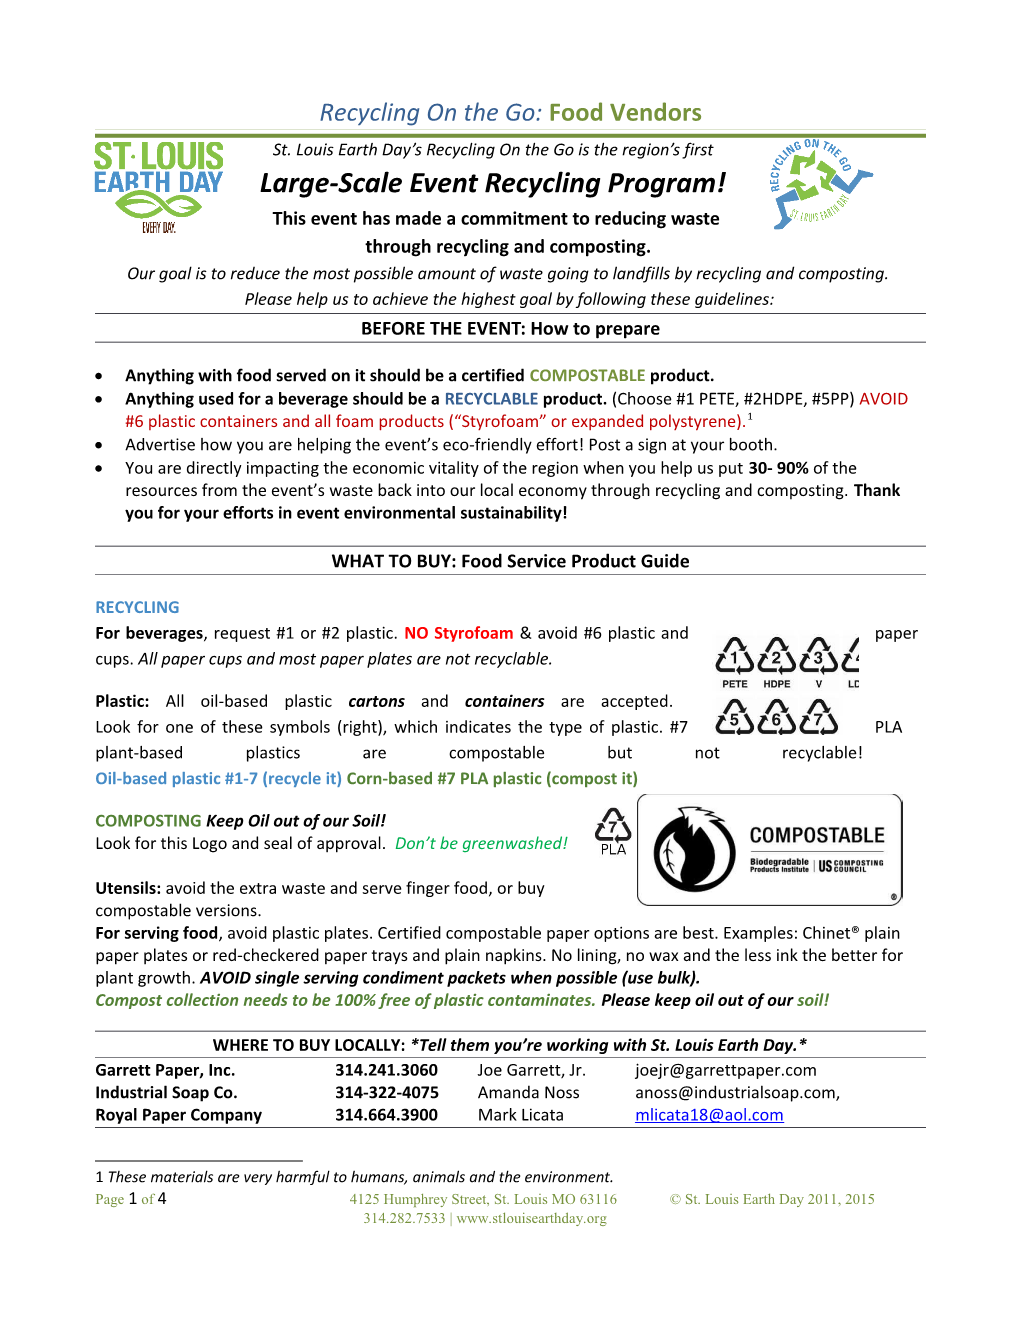 Recycling on the Go VENDOR INSTRUCTIONS